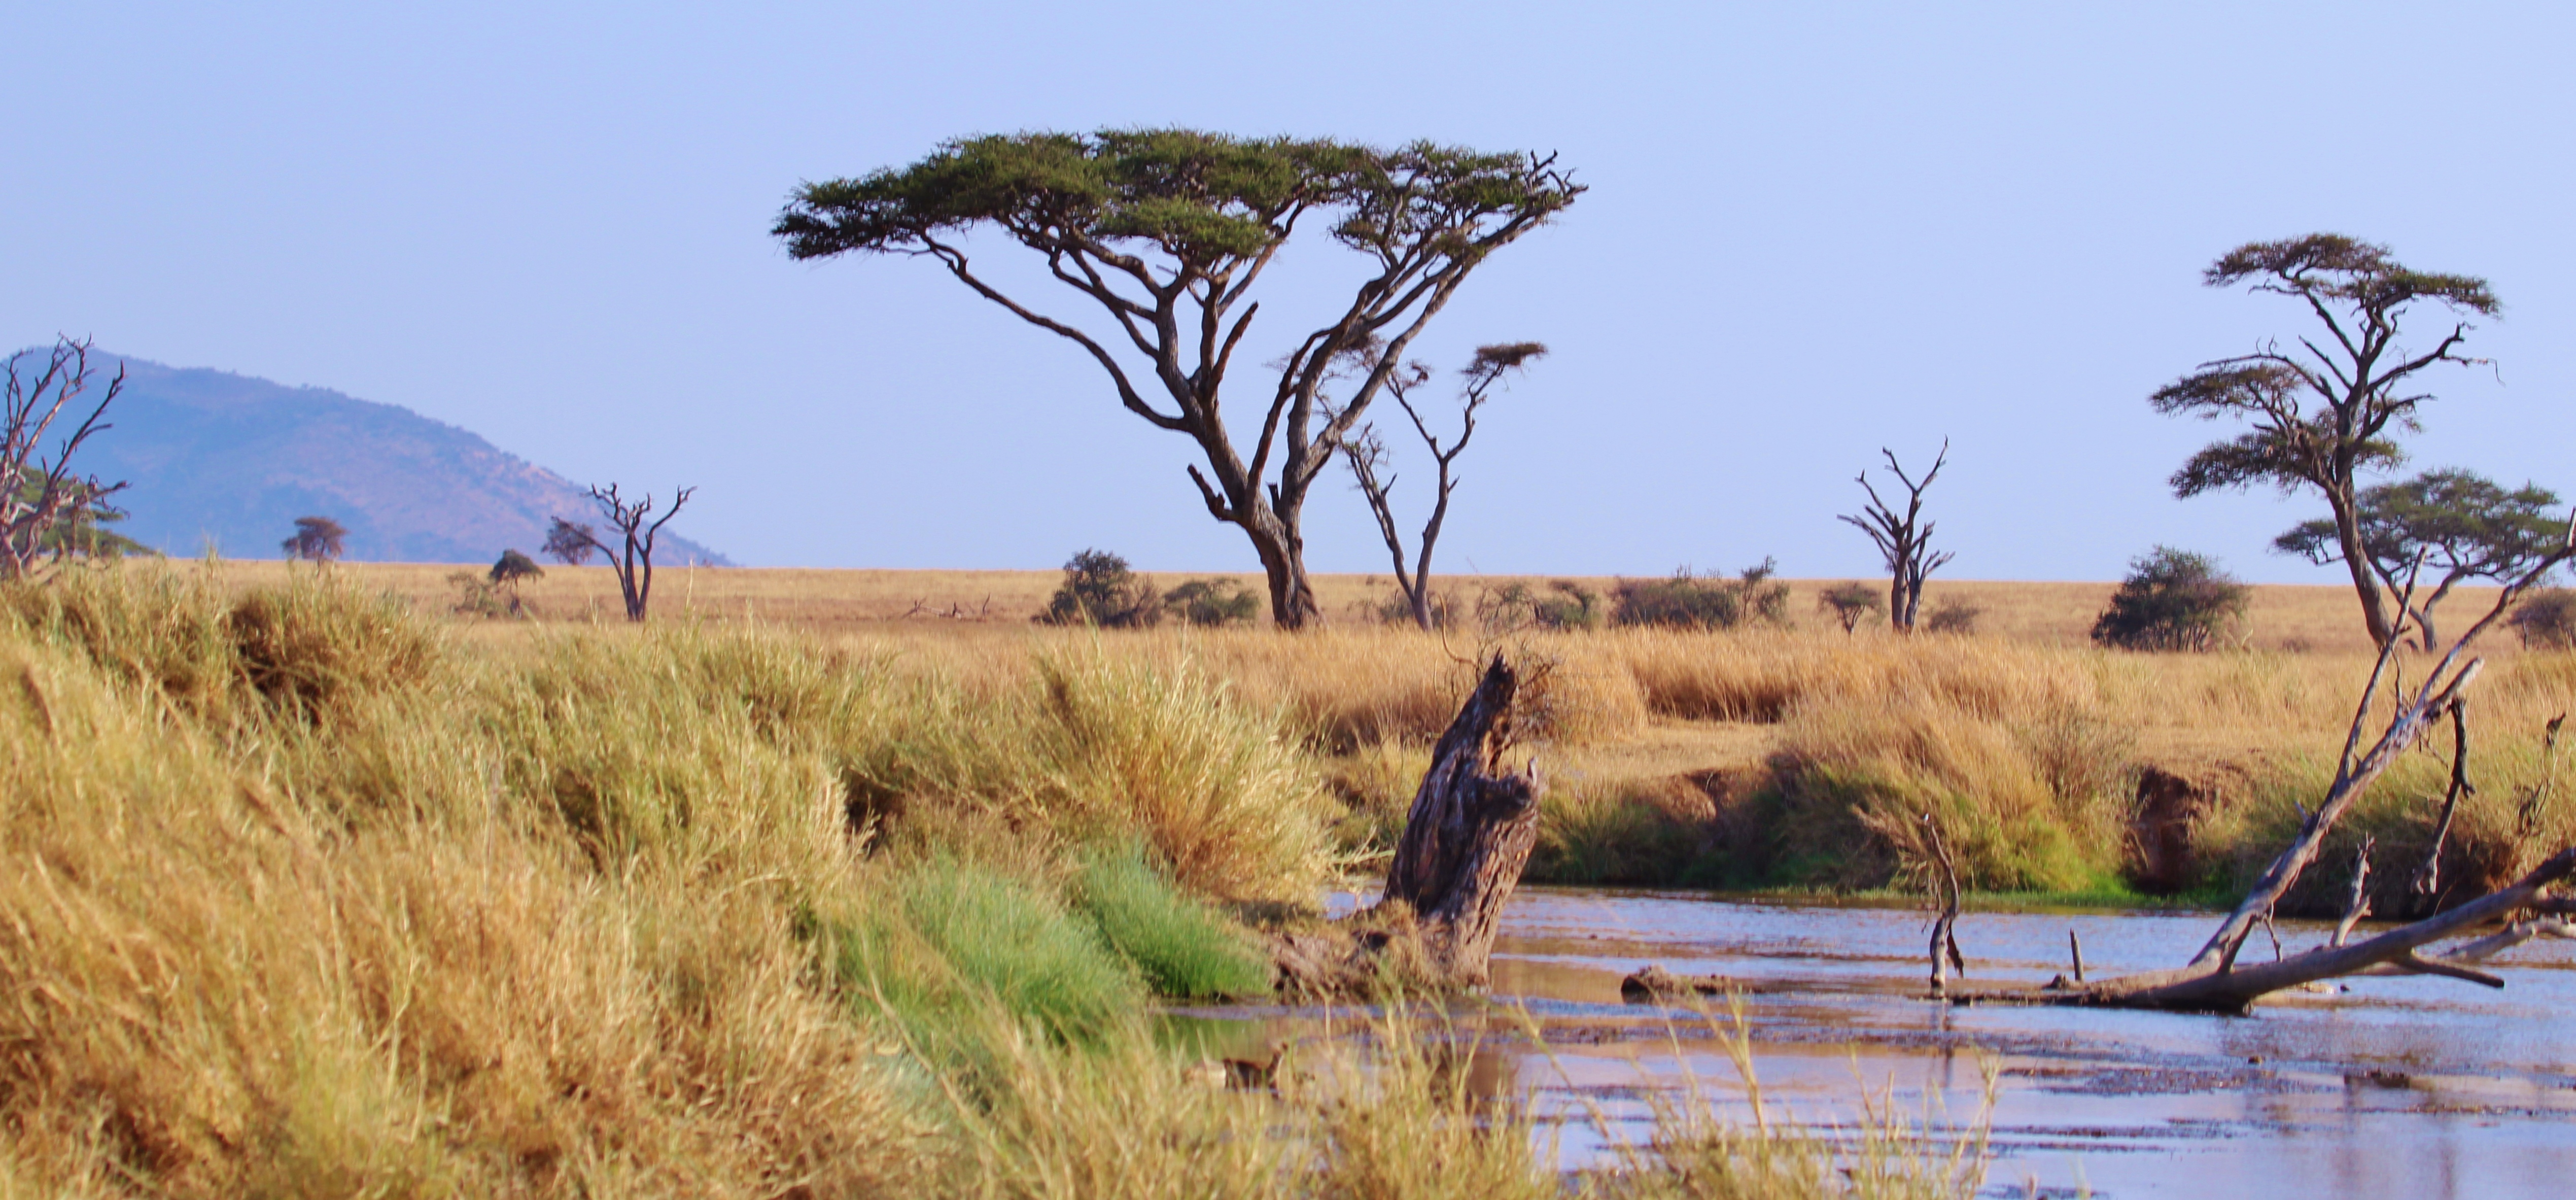 Best Times to Visit: Expert Tips to Optimize Your Safari Adventure in the Serengeti